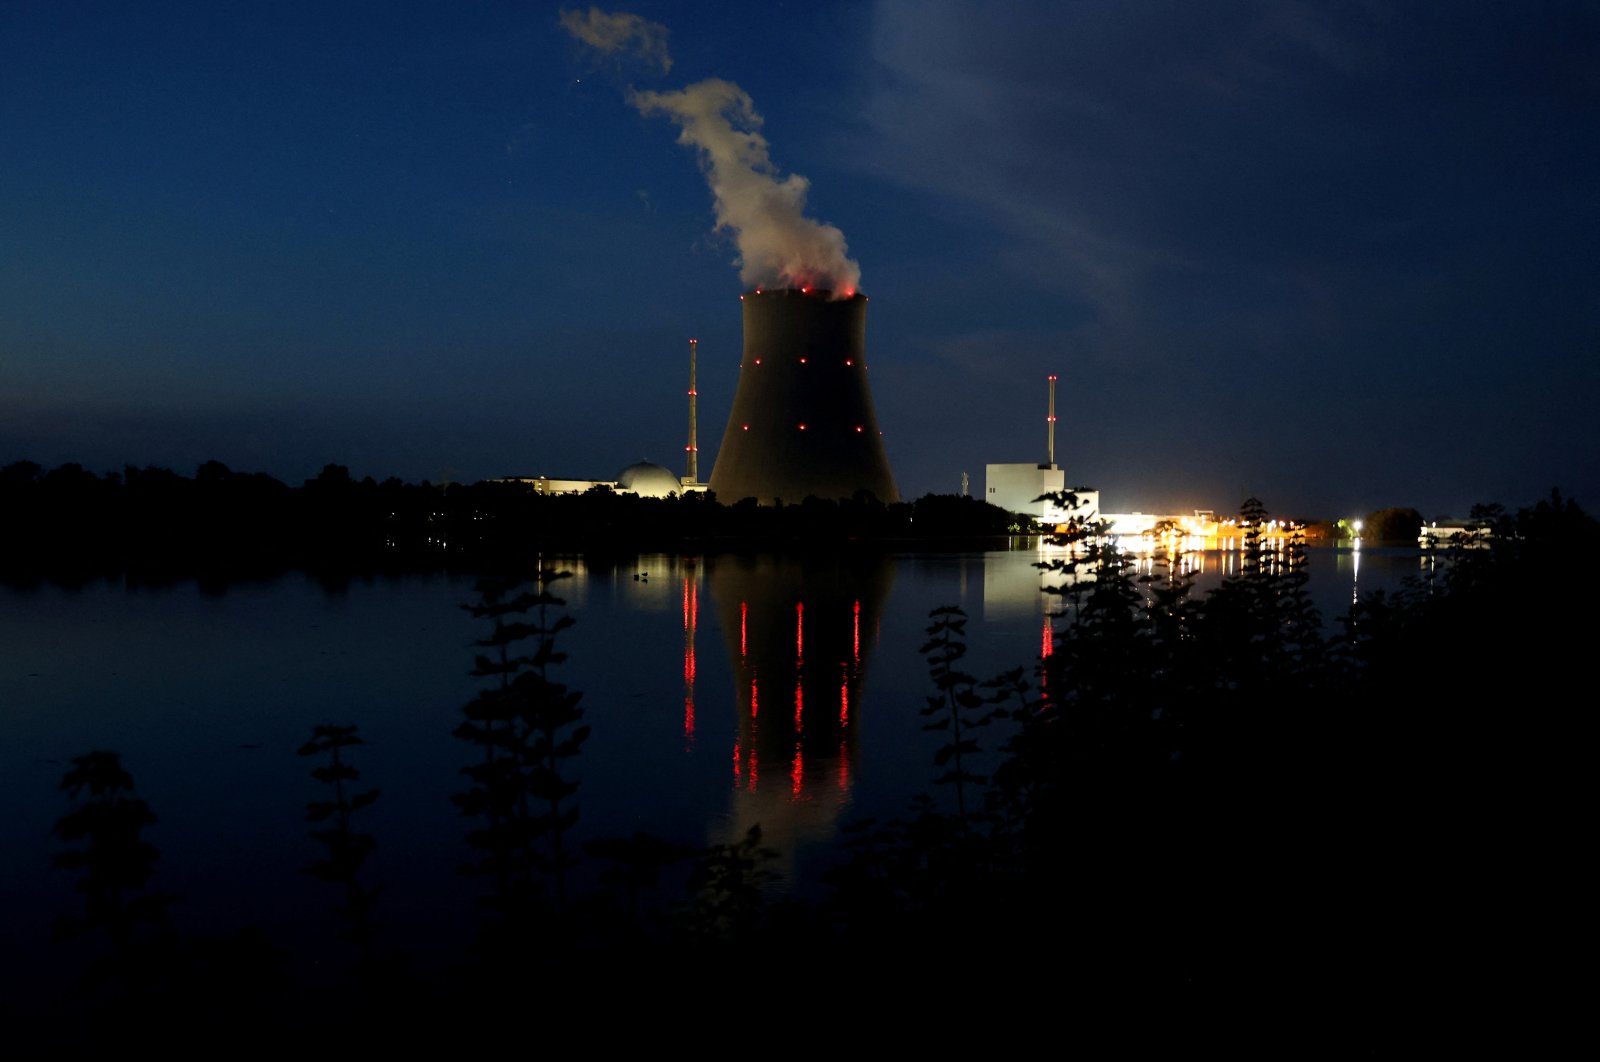 A general view shows the nuclear power plant Isar 2 by the river Isar in Eschenbach near Landshut, Germany, Aug. 17, 2022. (Reuters Photo)